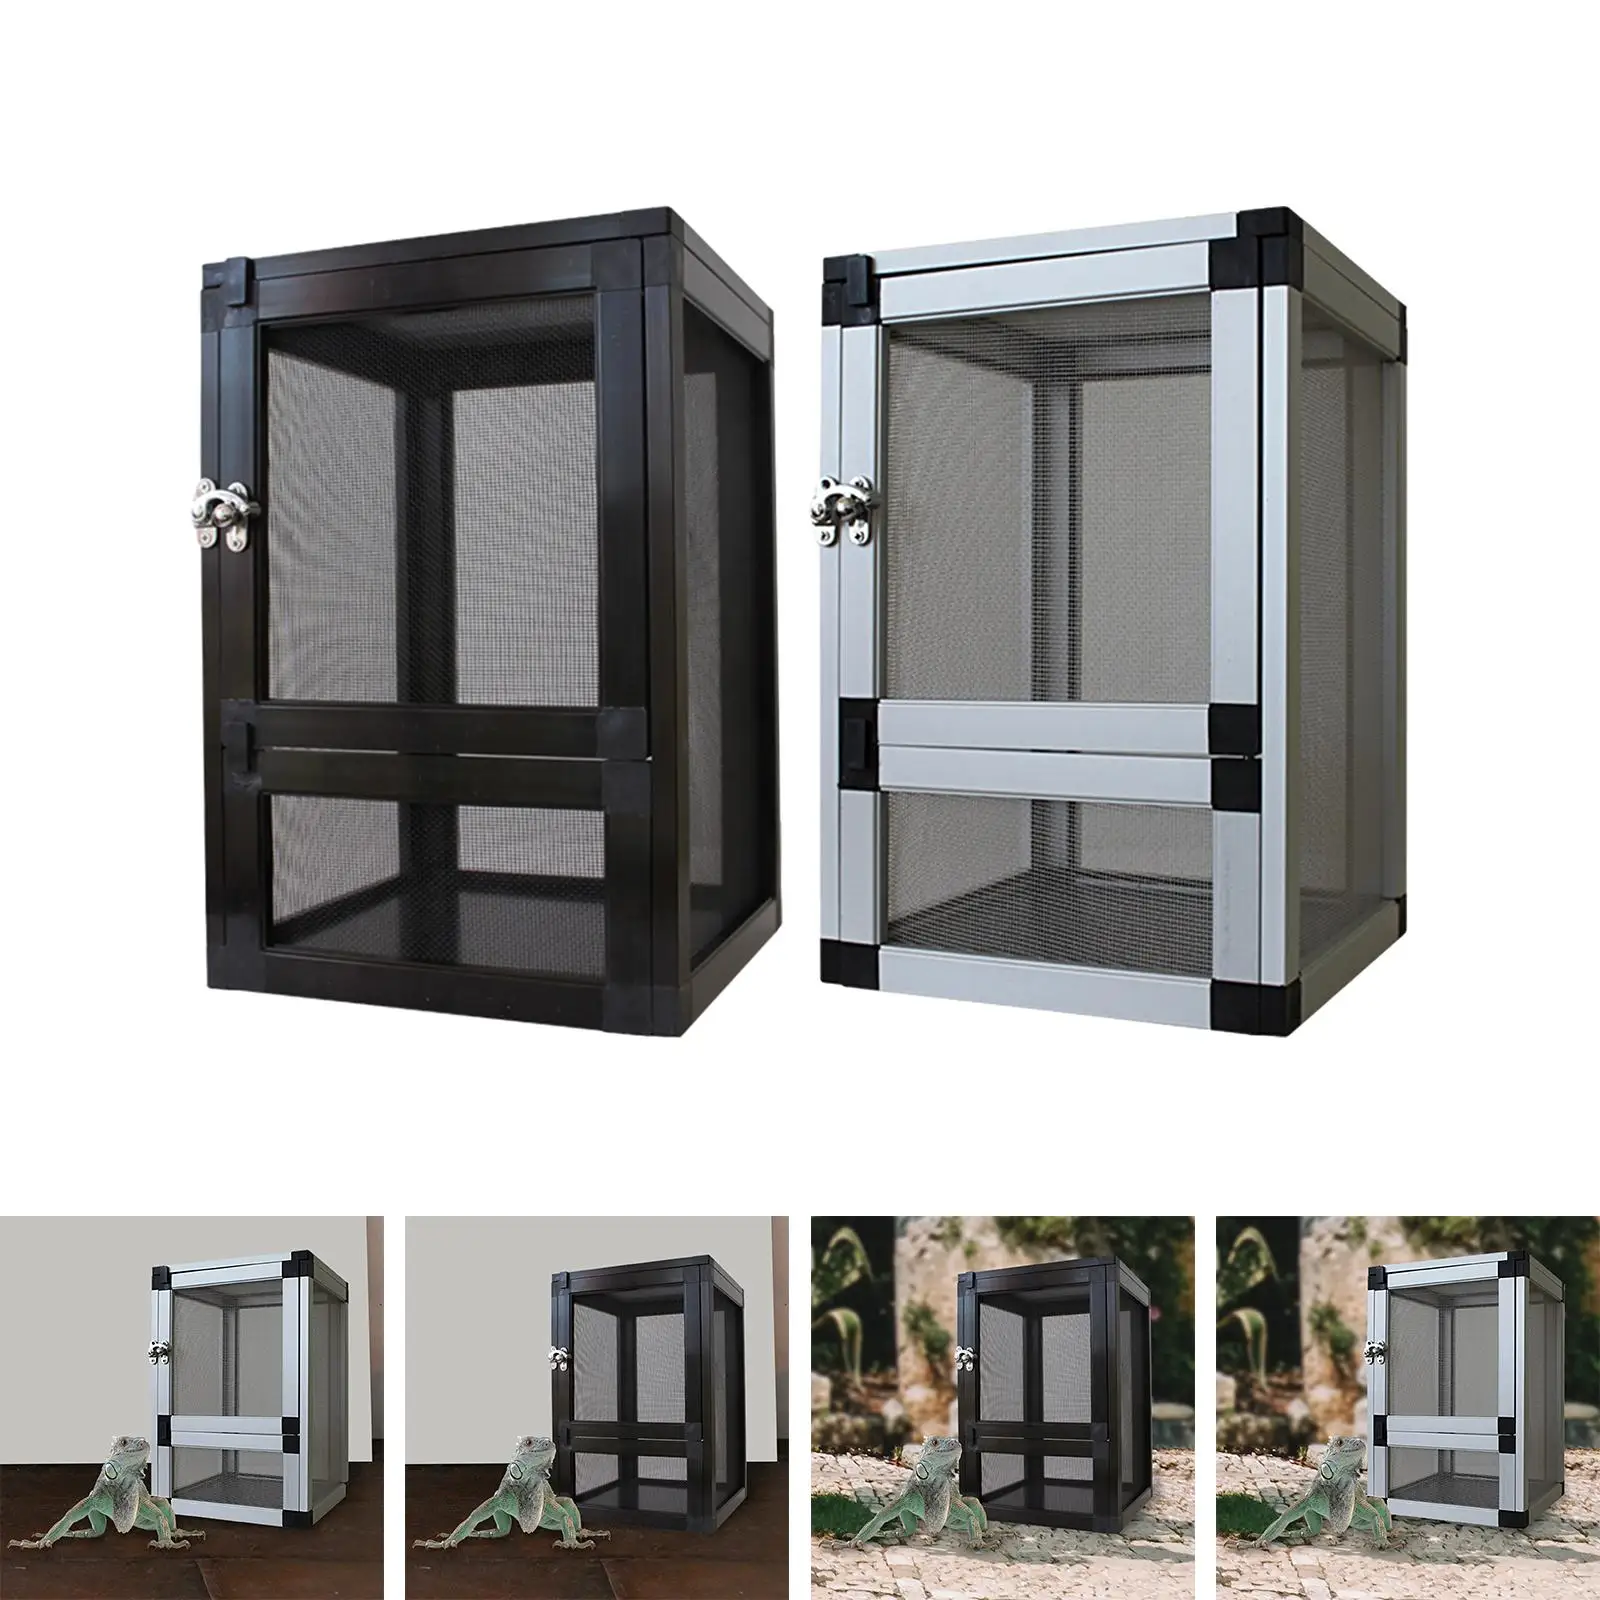 Air Screen Cages Ventilation Feeding Breeding Box Reptile Cage Reptiles Habitat for Frog Butterflies Transport Turtle Spiders